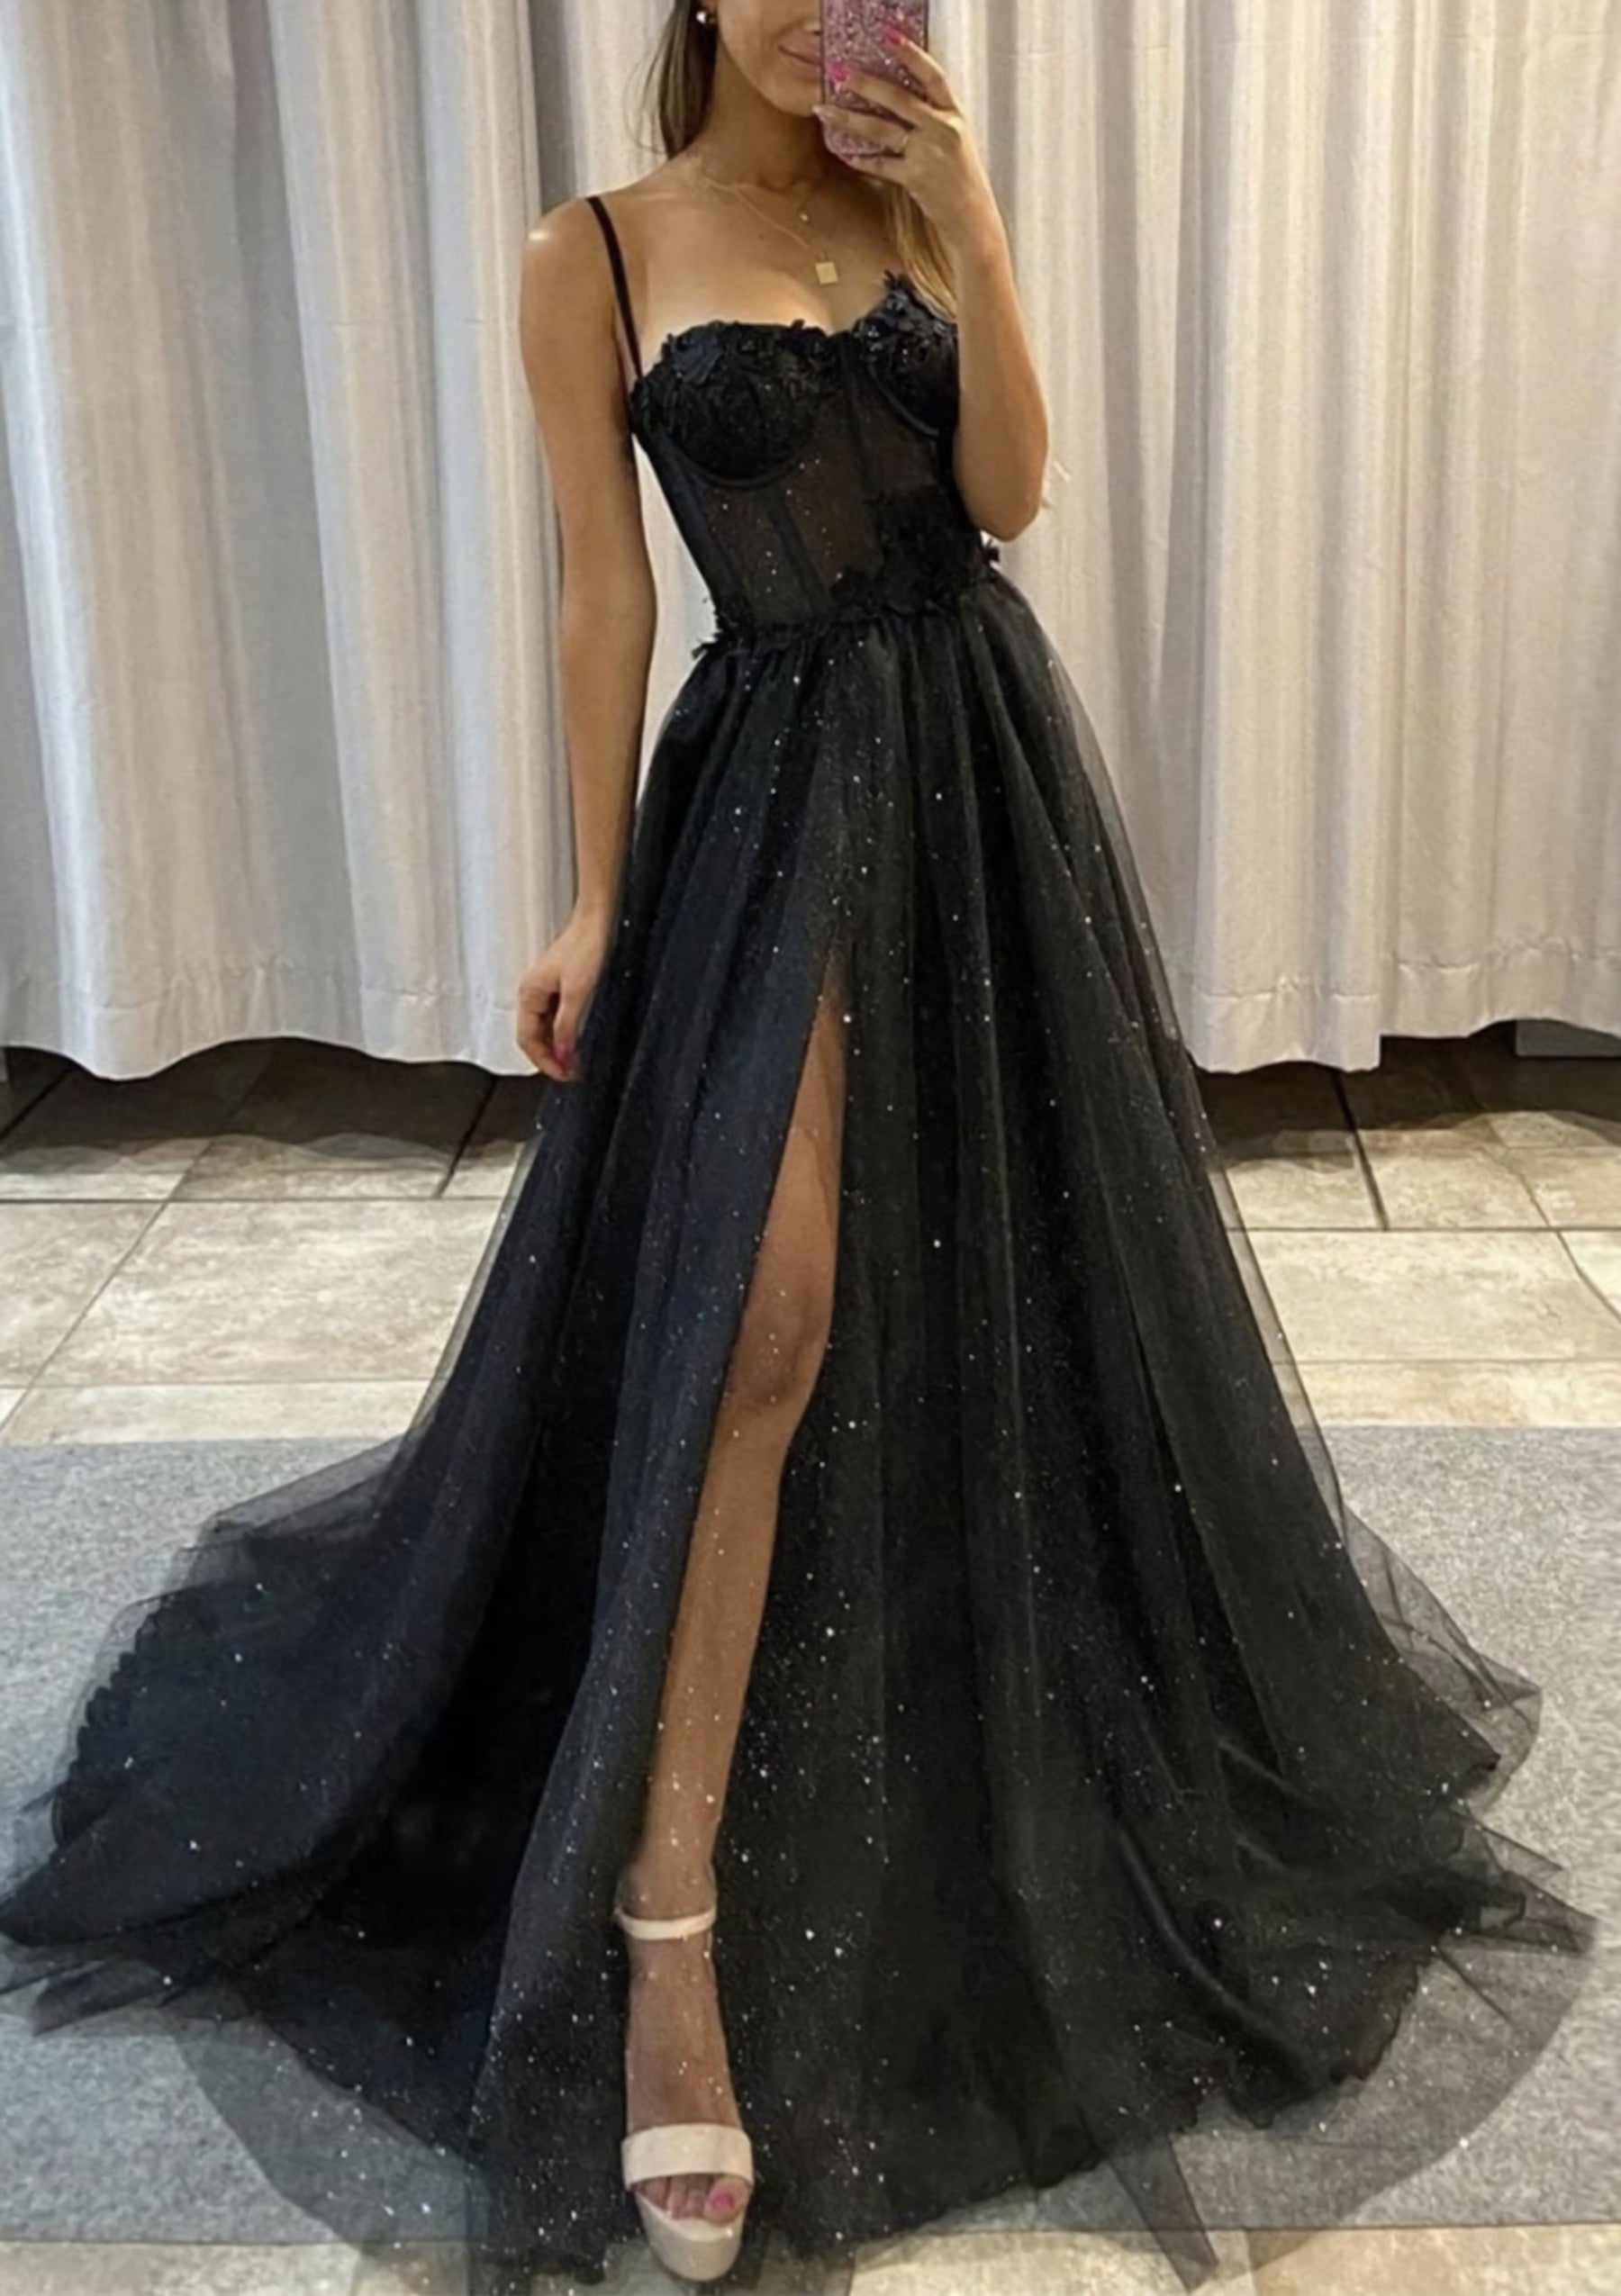 A-line Sweetheart Spaghetti Straps Sweep Train Tulle Glitter Corset Prom Dress With Appliqued Gowns, Prom Dresses Fitted